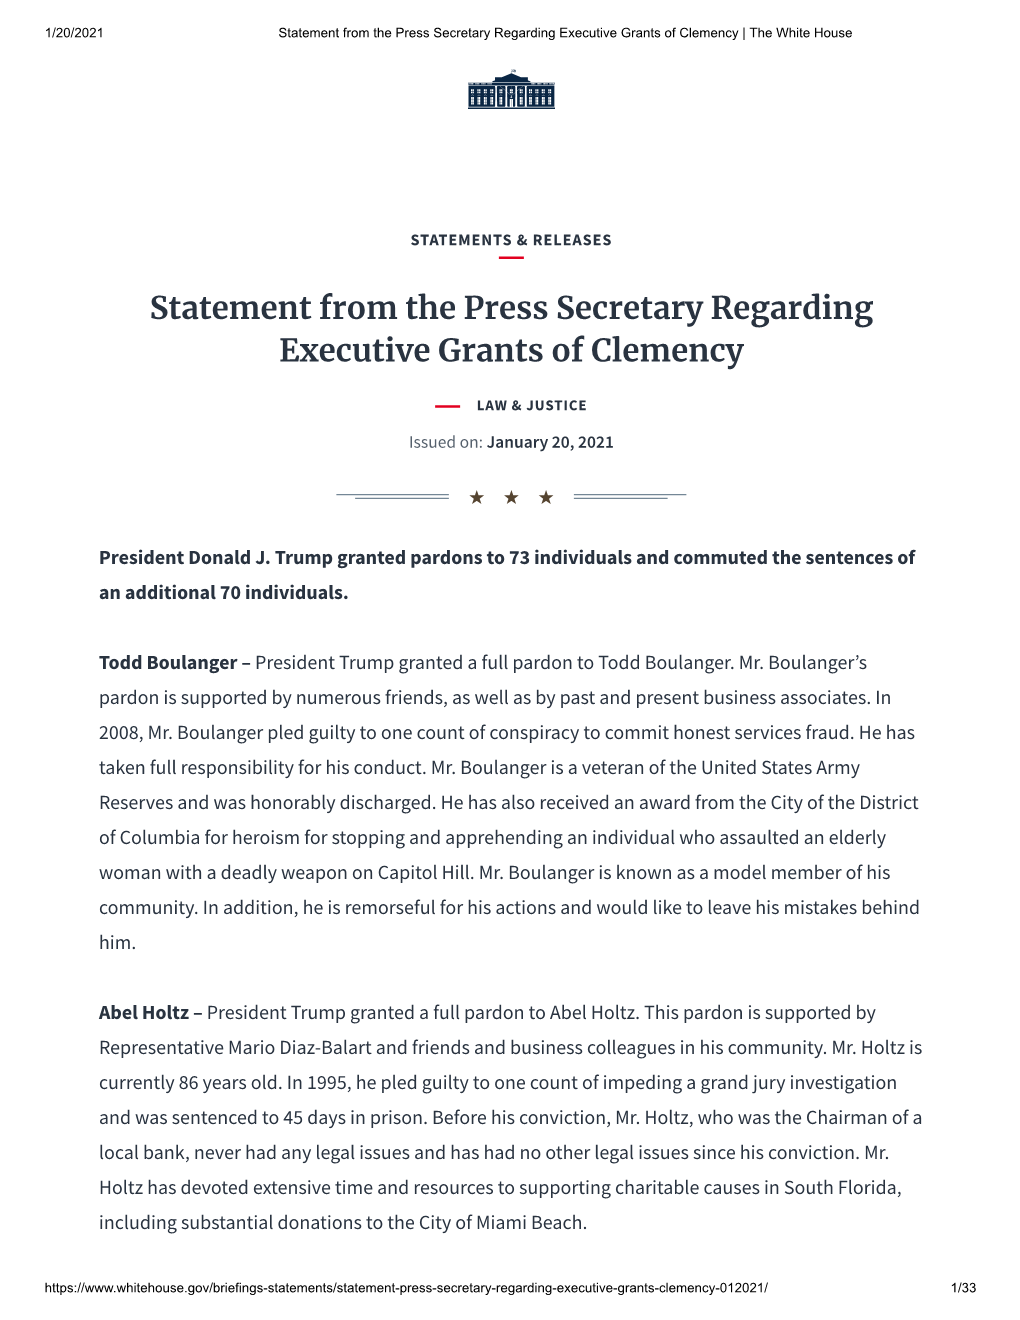 Statement from the Press Secretary Regarding Executive Grants of Clemency | the White House